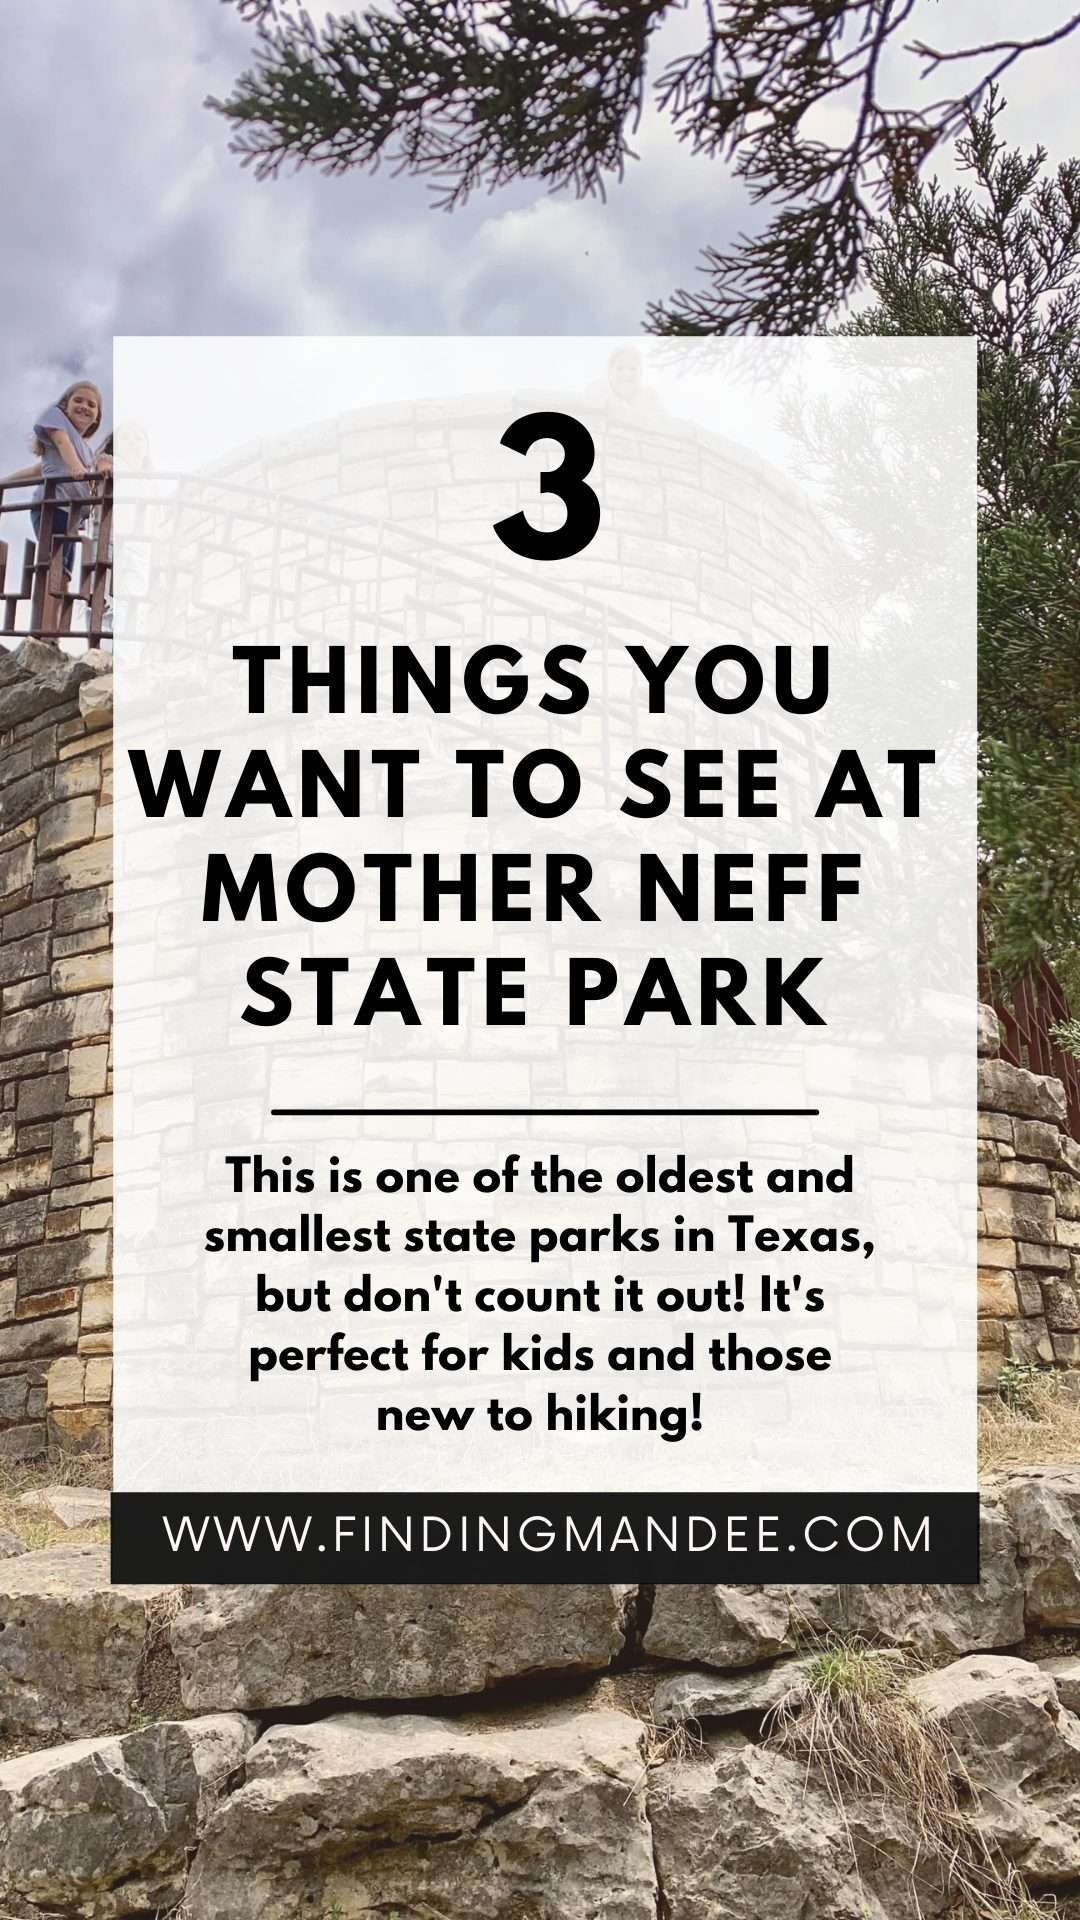 3 Things You Want to See at Mother Neff State Park | Finding Mandee